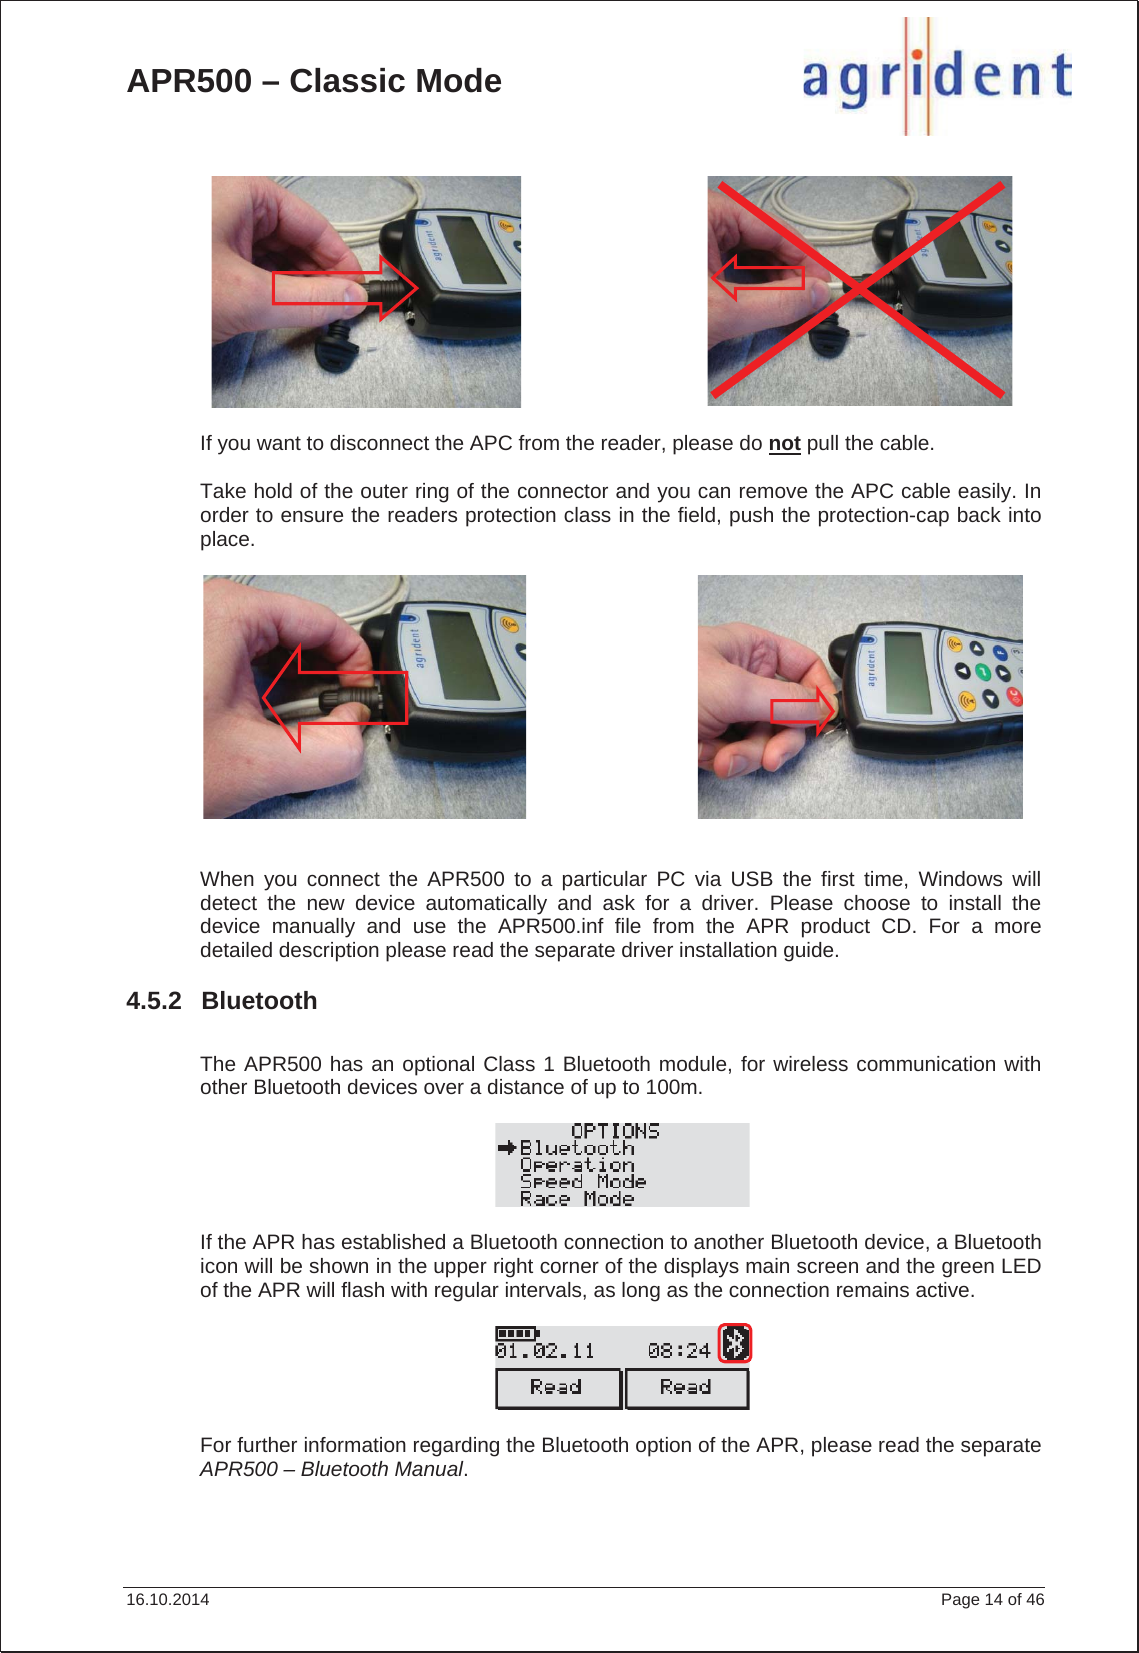 APR500 – Classic Mode 16.10.2014    Page 14 of 46 If you want to disconnect the APC from the reader, please do not pull the cable. Take hold of the outer ring of the connector and you can remove the APC cable easily. In order to ensure the readers protection class in the field, push the protection-cap back into place.When you connect the APR500 to a particular PC via USB the first time, Windows will detect the new device automatically and ask for a driver. Please choose to install the device manually and use the APR500.inf file from the APR product CD. For a more detailed description please read the separate driver installation guide. 4.5.2 Bluetooth The APR500 has an optional Class 1 Bluetooth module, for wireless communication with other Bluetooth devices over a distance of up to 100m. If the APR has established a Bluetooth connection to another Bluetooth device, a Bluetooth icon will be shown in the upper right corner of the displays main screen and the green LED of the APR will flash with regular intervals, as long as the connection remains active. For further information regarding the Bluetooth option of the APR, please read the separate APR500 – Bluetooth Manual.